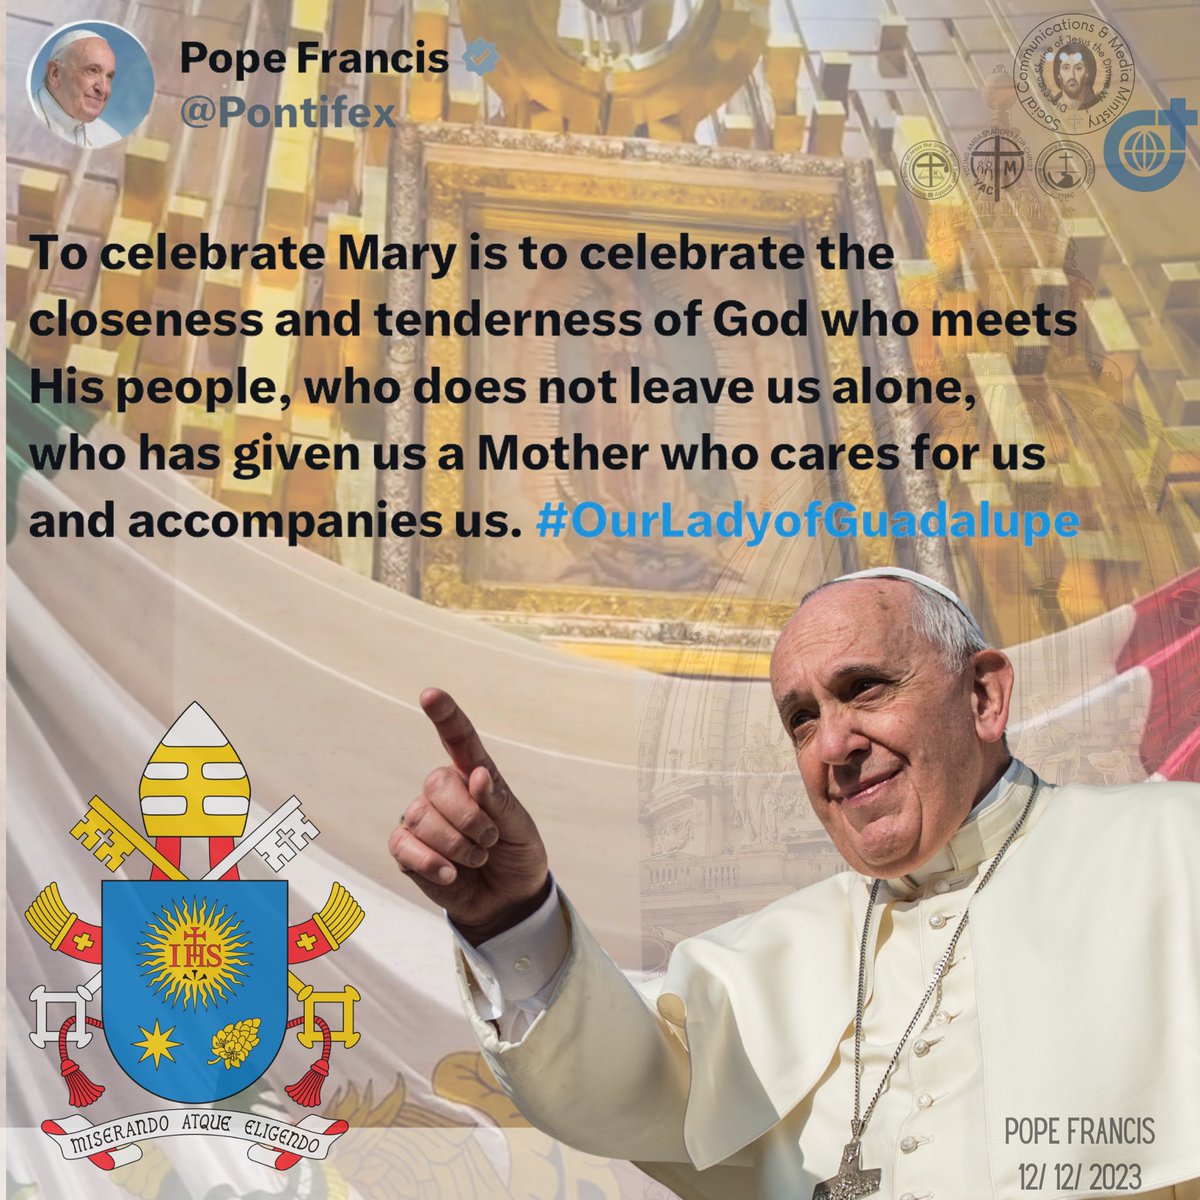 #OurLadyofGuadalupe

(His Holiness, Pope Francis - Tuesday in the 2nd Week of Advent, December 12, 2023-Feast Day of Our Lady of Guadalupe)

#HolyFatherTweets #PopeFrancisTwitterTweets
#PapalTweets #PontifexTweets #SVD #DSJDW #CtKMS #YAC #YMAC #SYM #SVDyouth #ShrineYouth #(ctto)